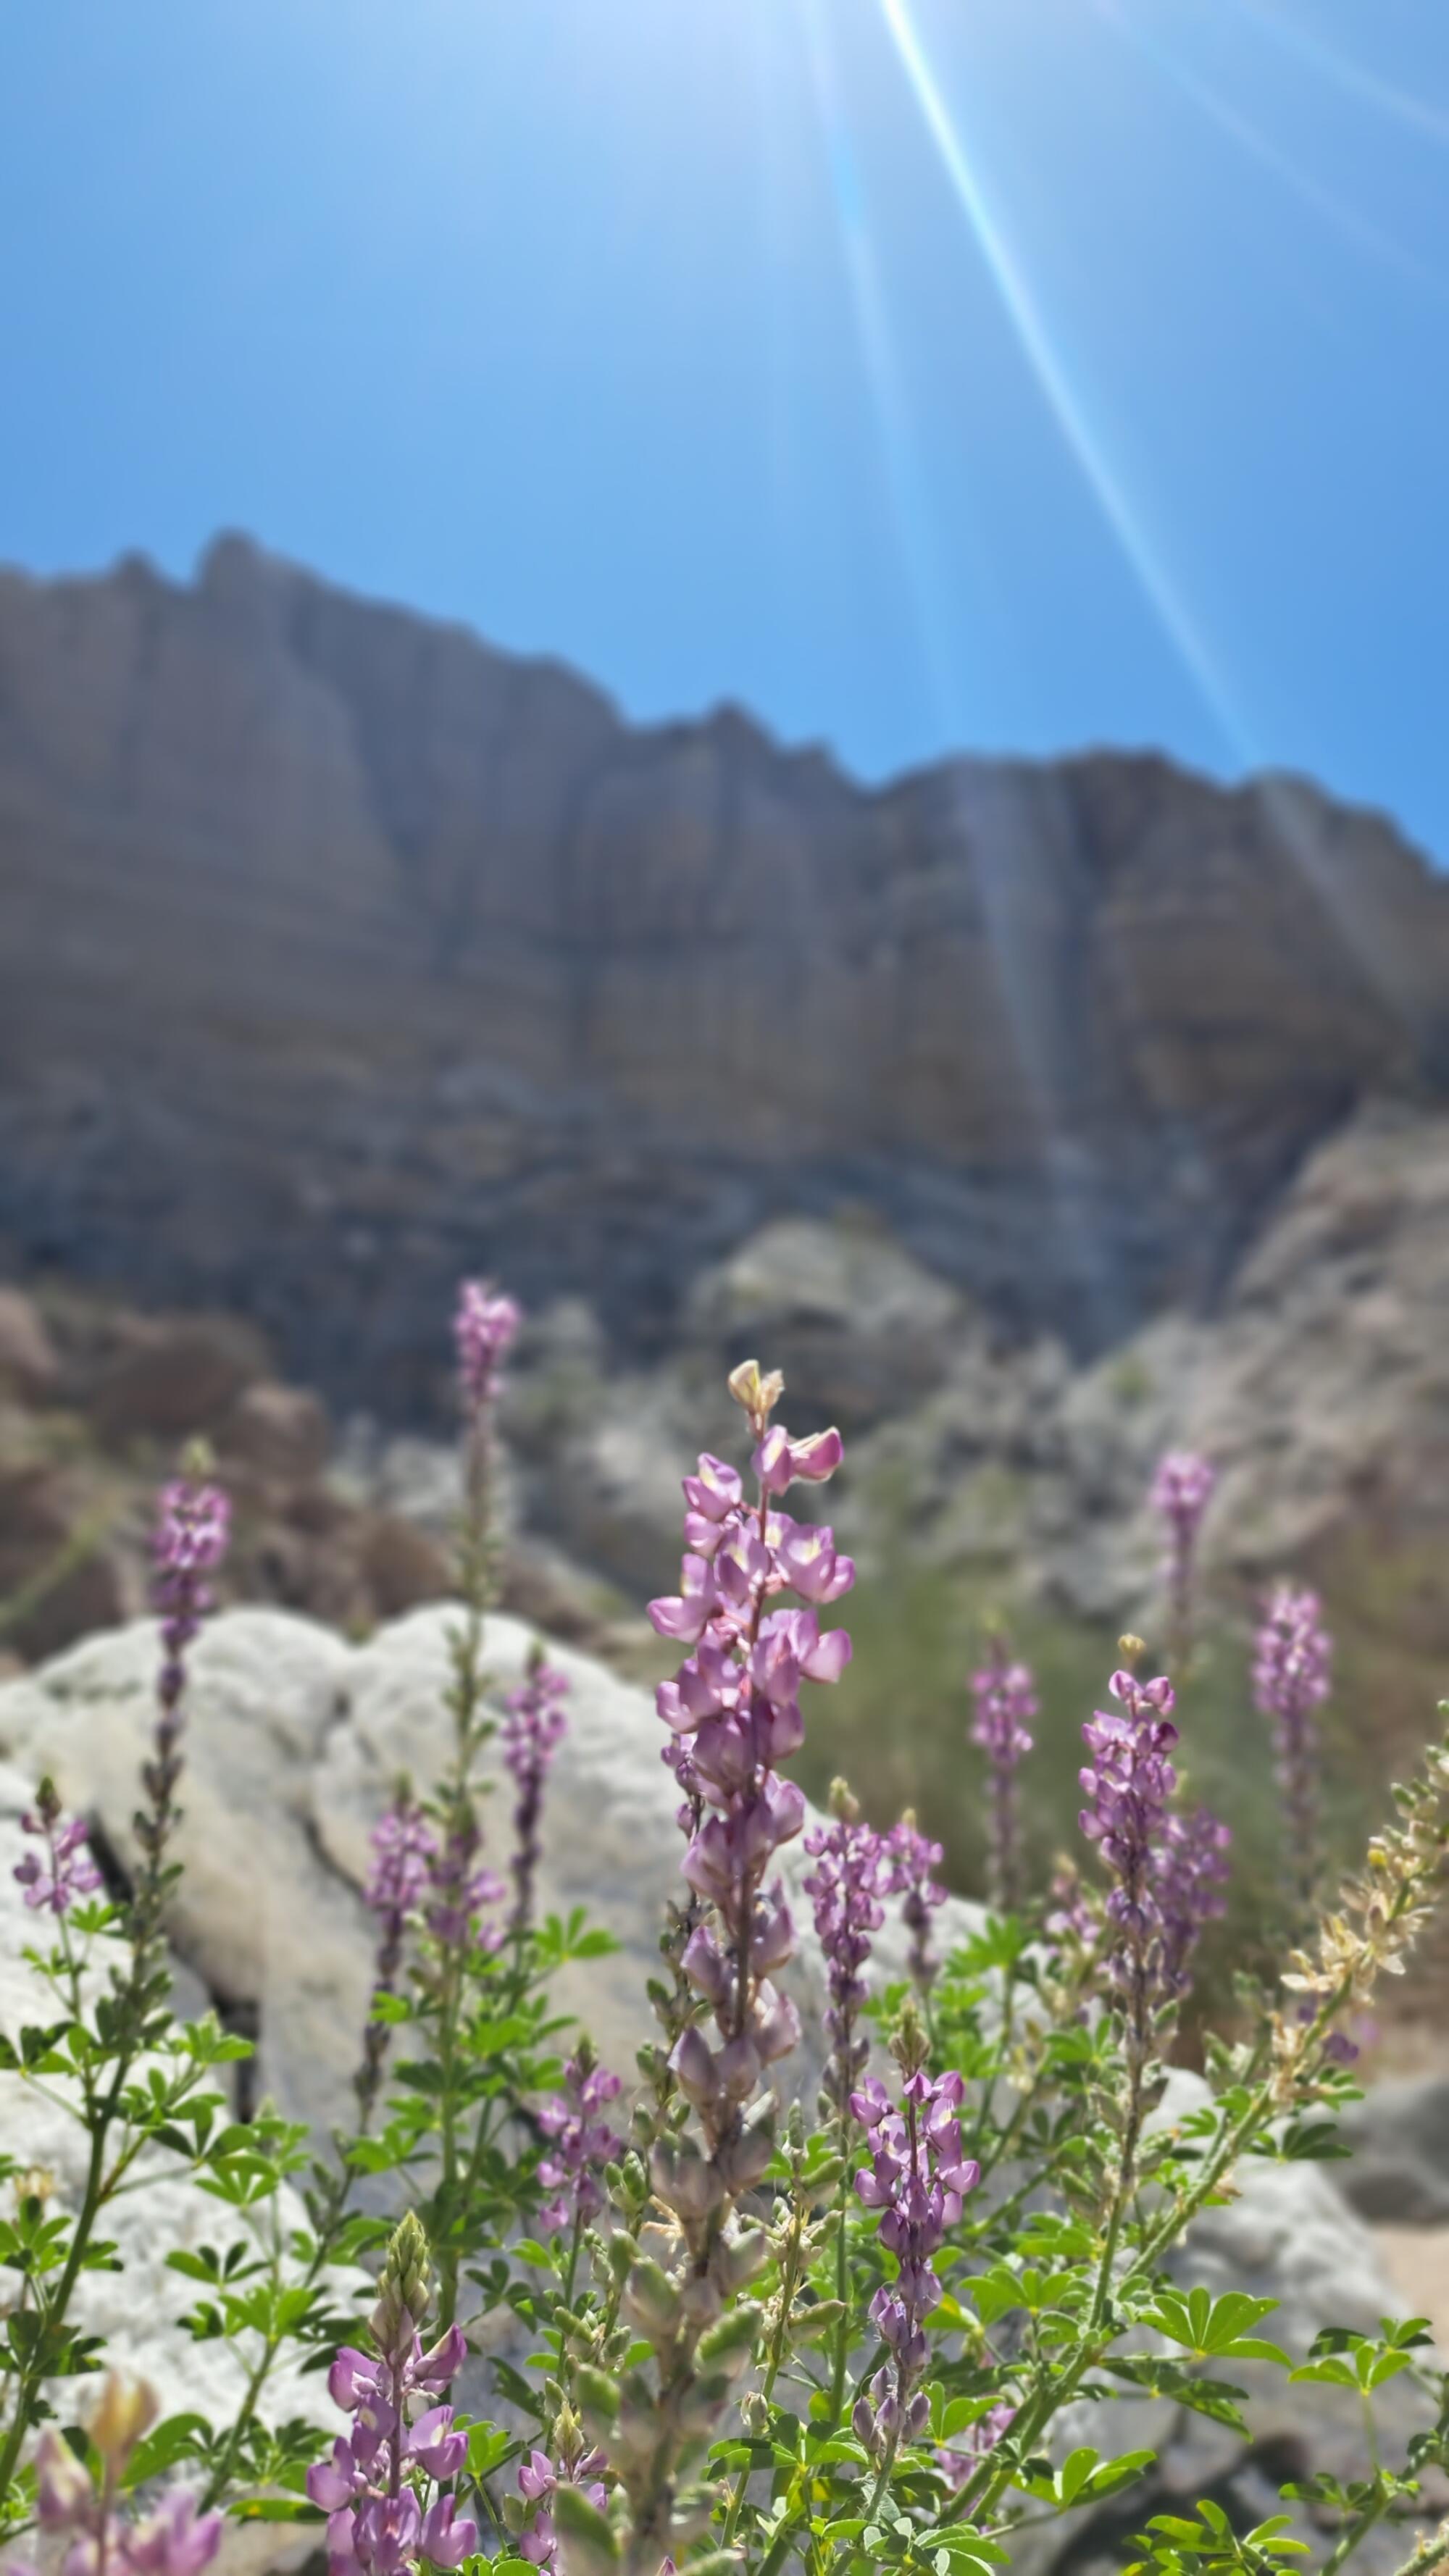 Purple lupines bloom in a rocky landscape under sunny skies